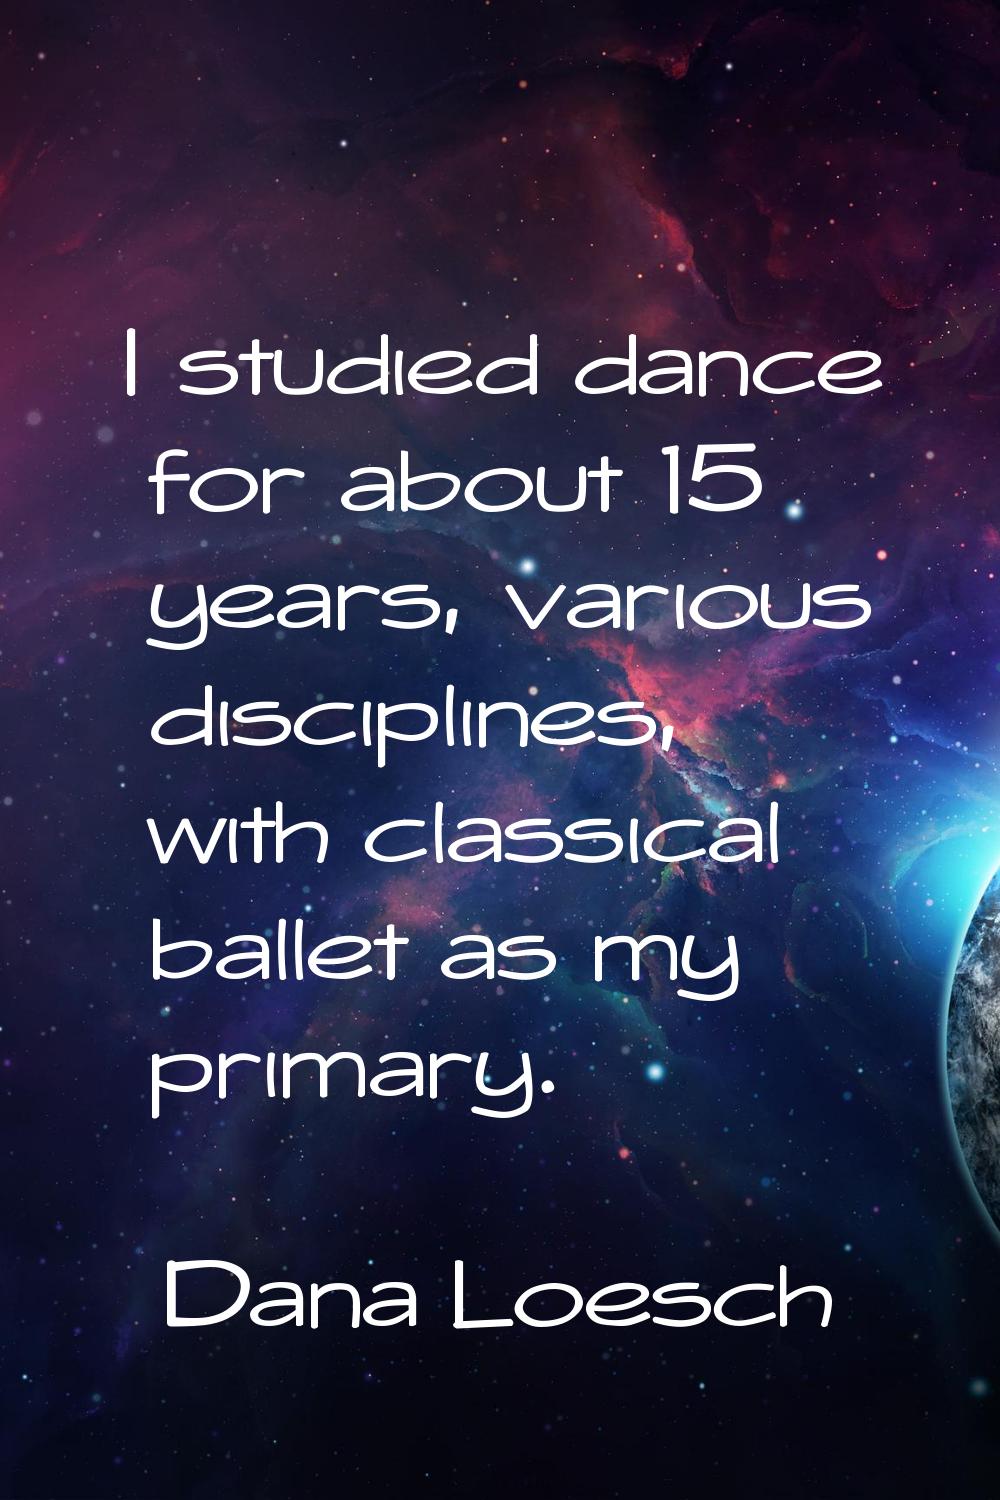 I studied dance for about 15 years, various disciplines, with classical ballet as my primary.